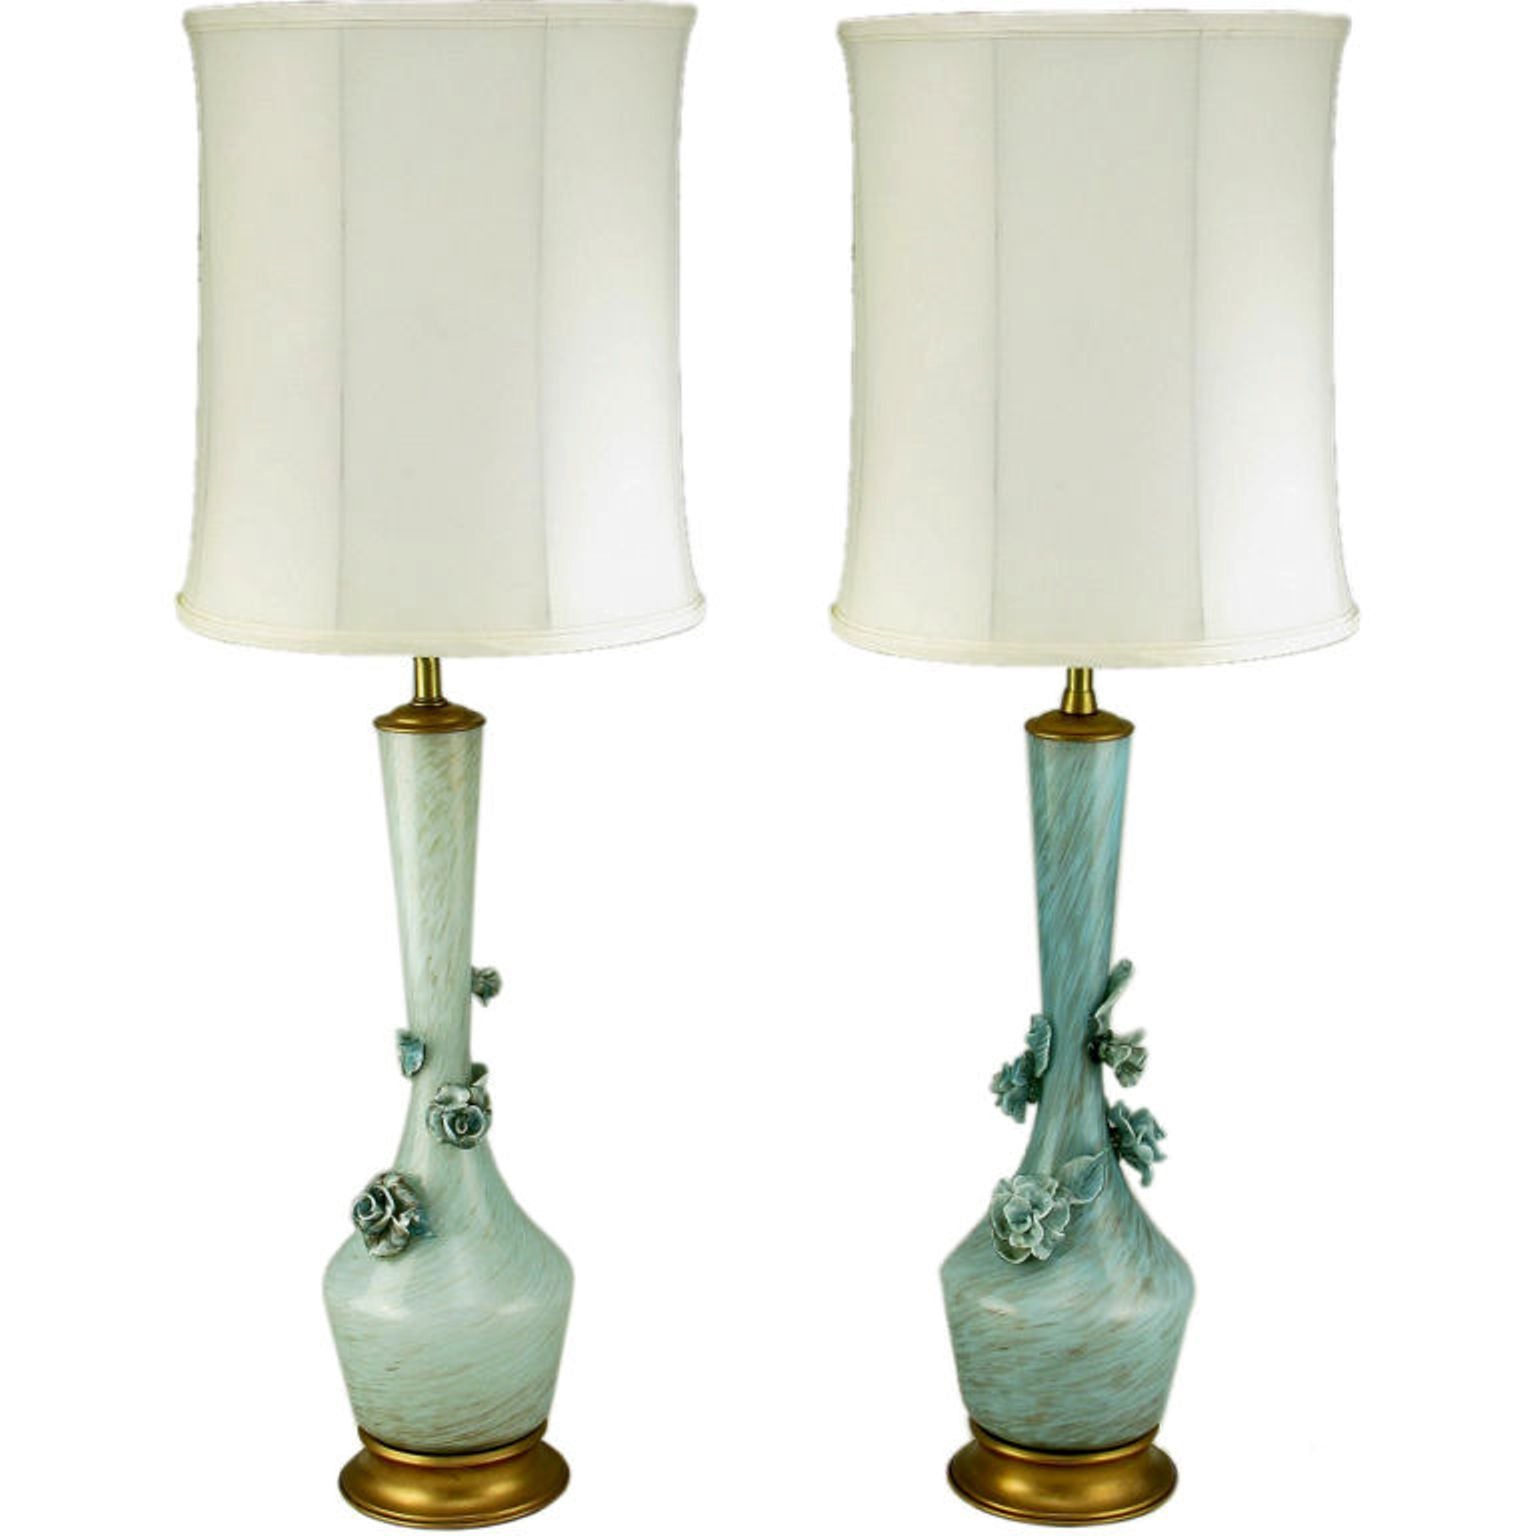 Pair Marbro Blue Murano Glass Table Lamps With Floral Appliques